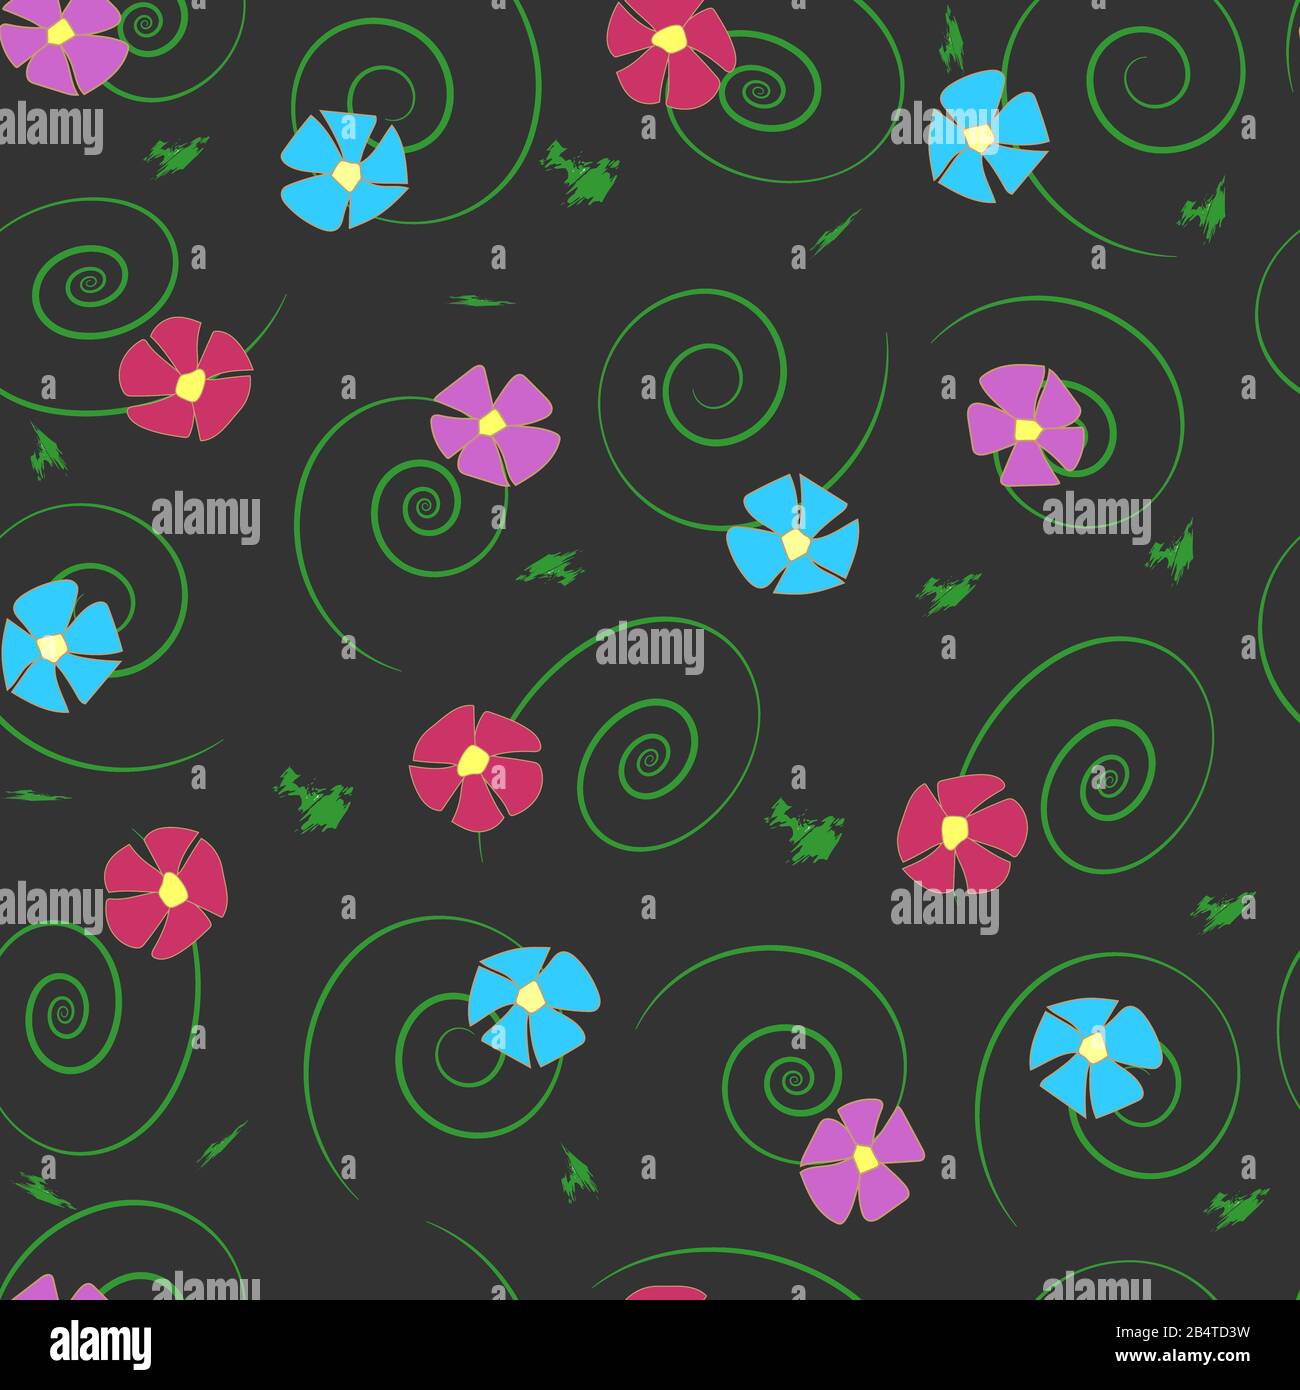 seamless pattern. simple five-petalled flowers of violet, lilac, blue, burgundy color with green curls and brush strokes on a dark background. Stock Vector